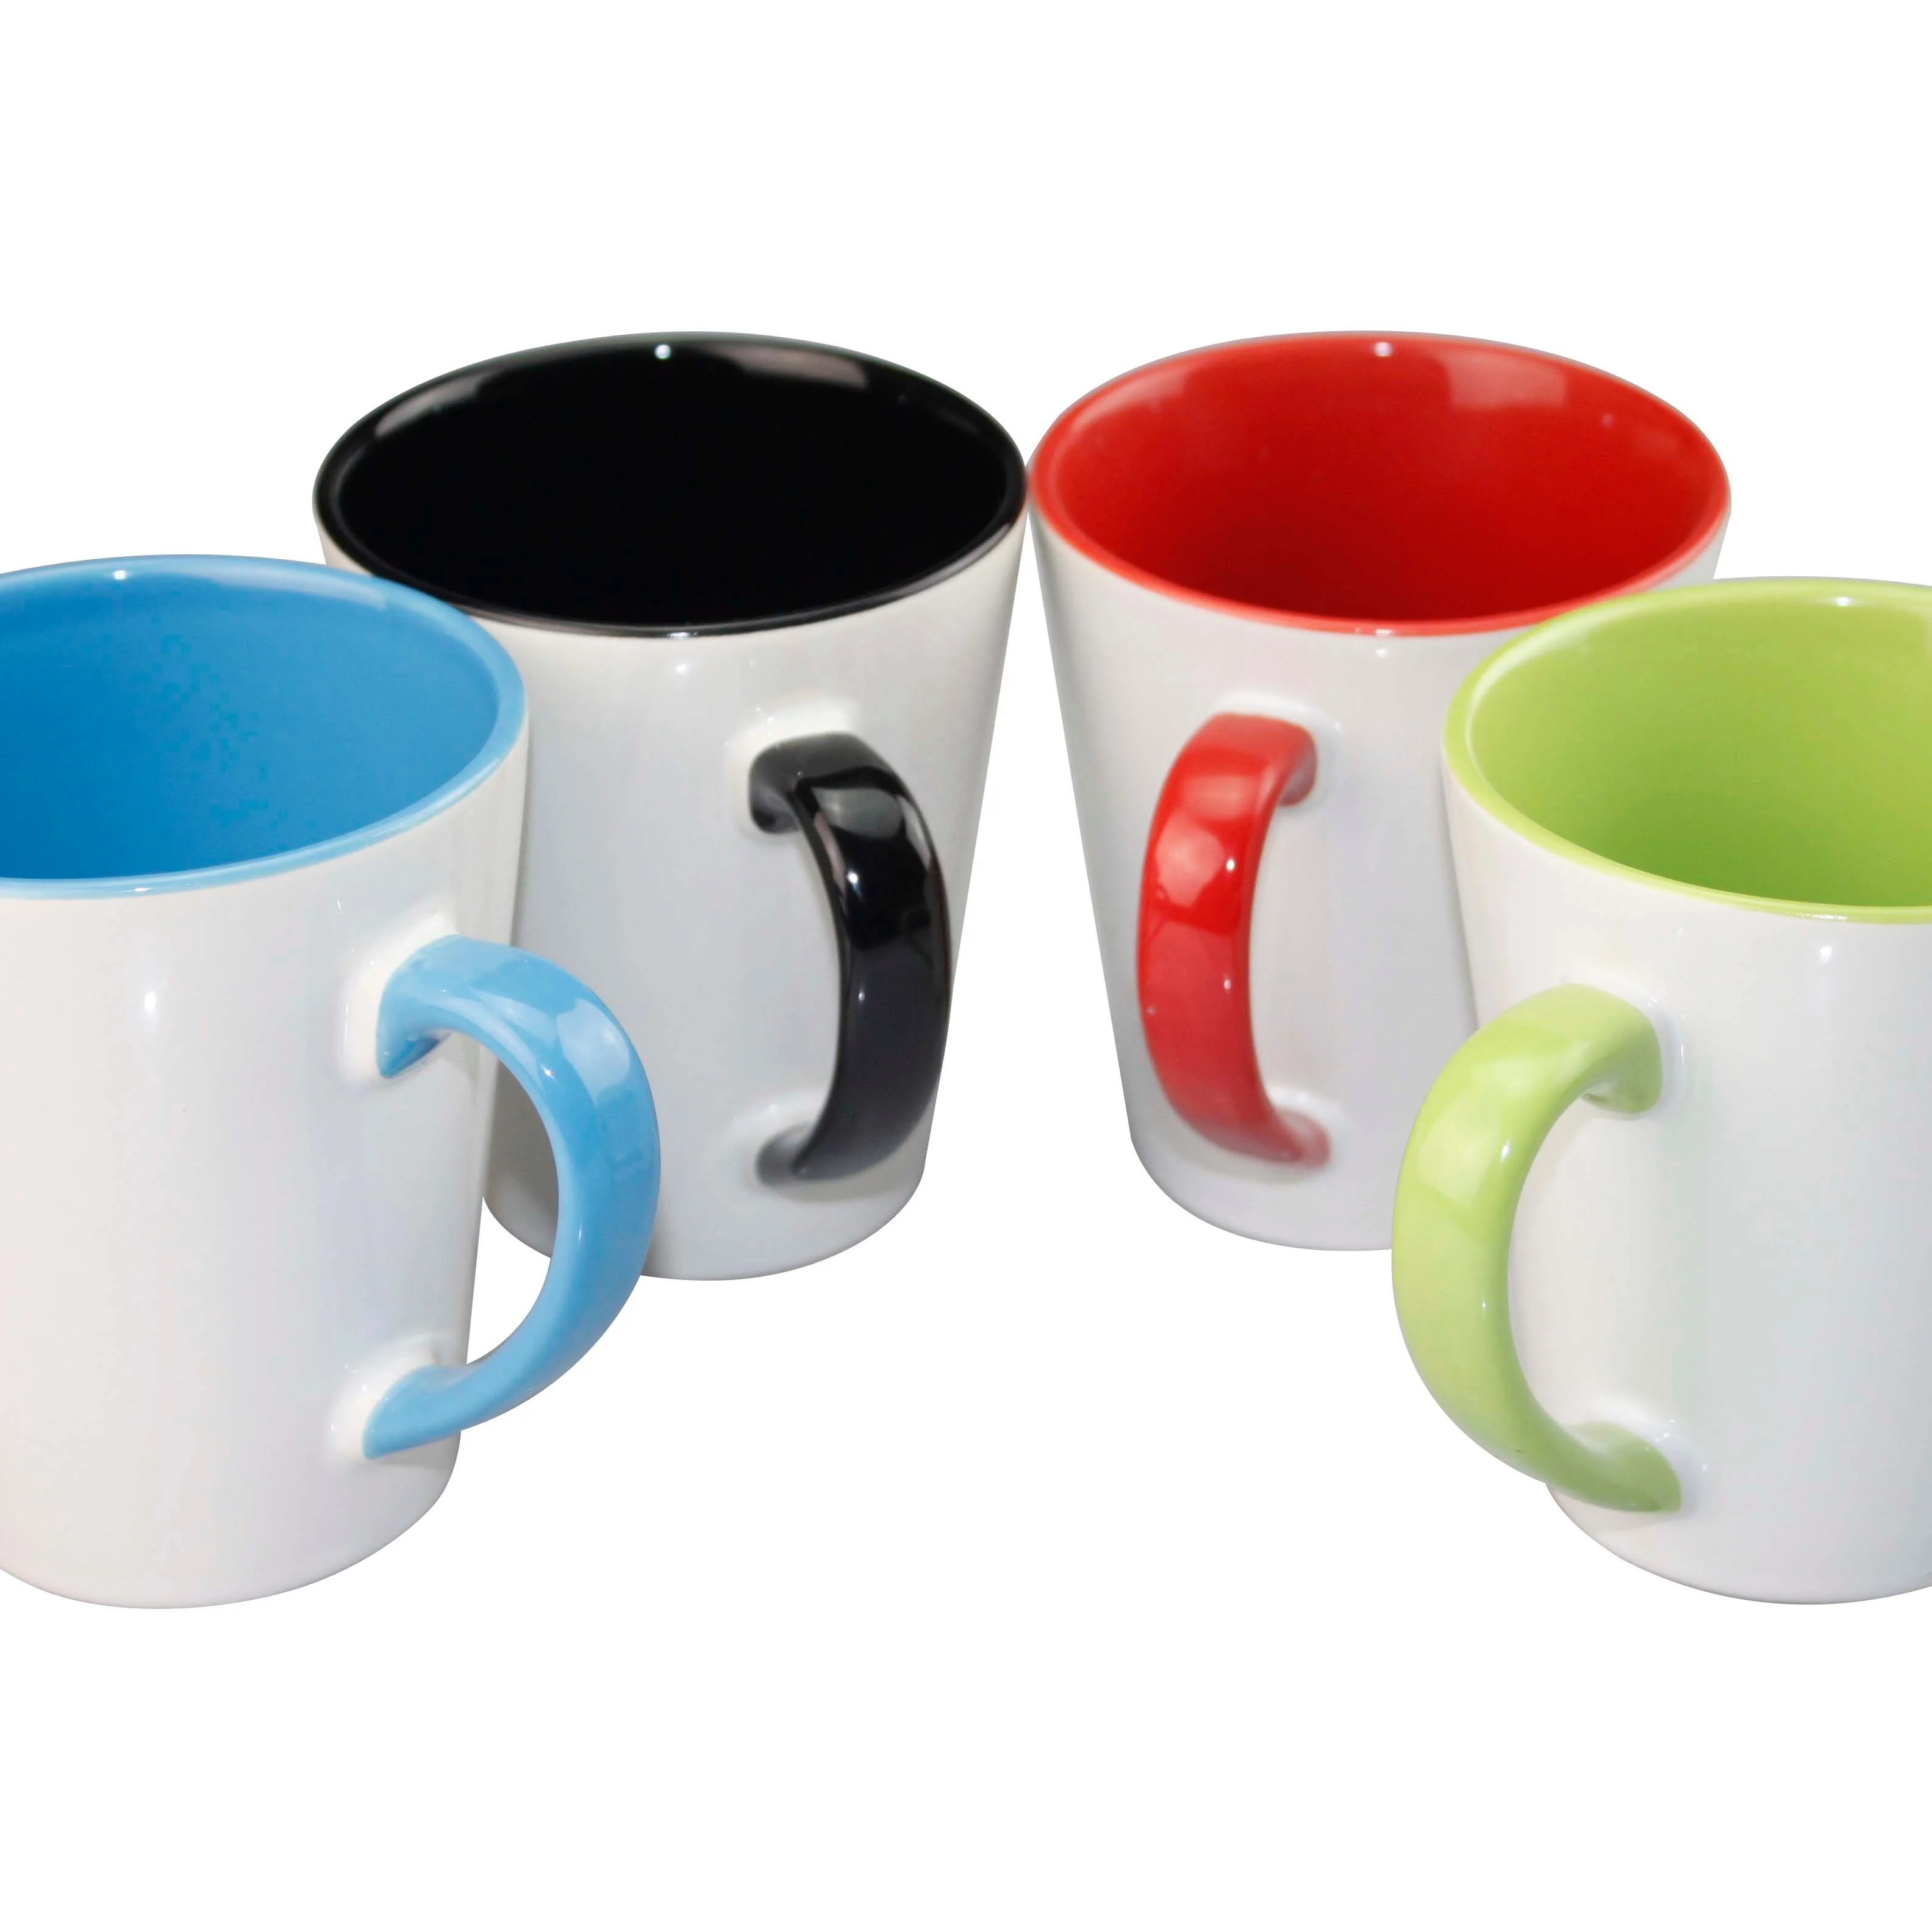 Sublimation Egg Shaped Cup 12oz Mugs Blank Steel Heat Press Printing Transfer 